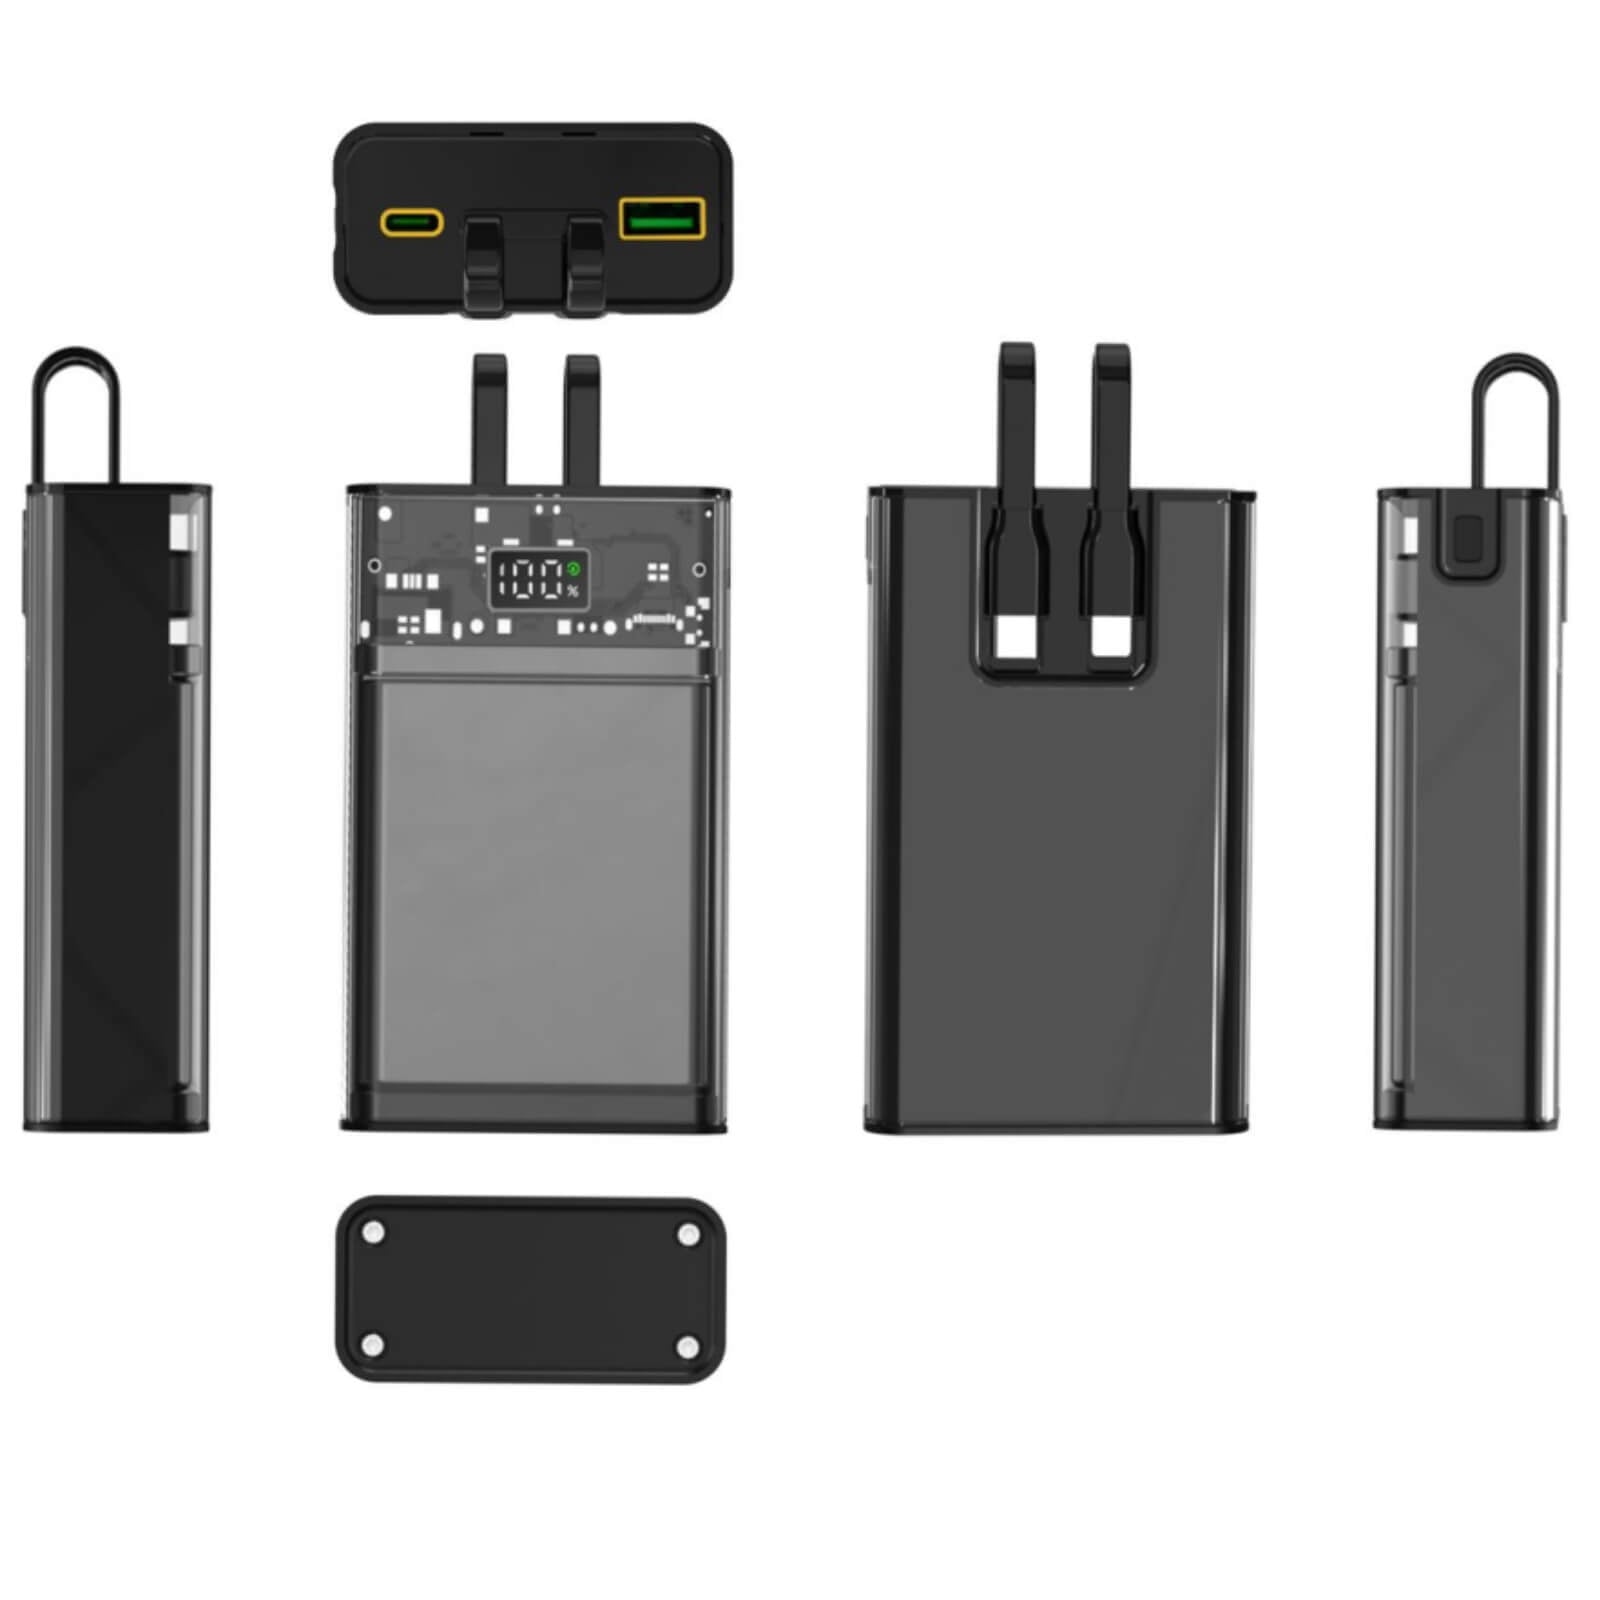 20000mah-display-power-bank-black with different angles